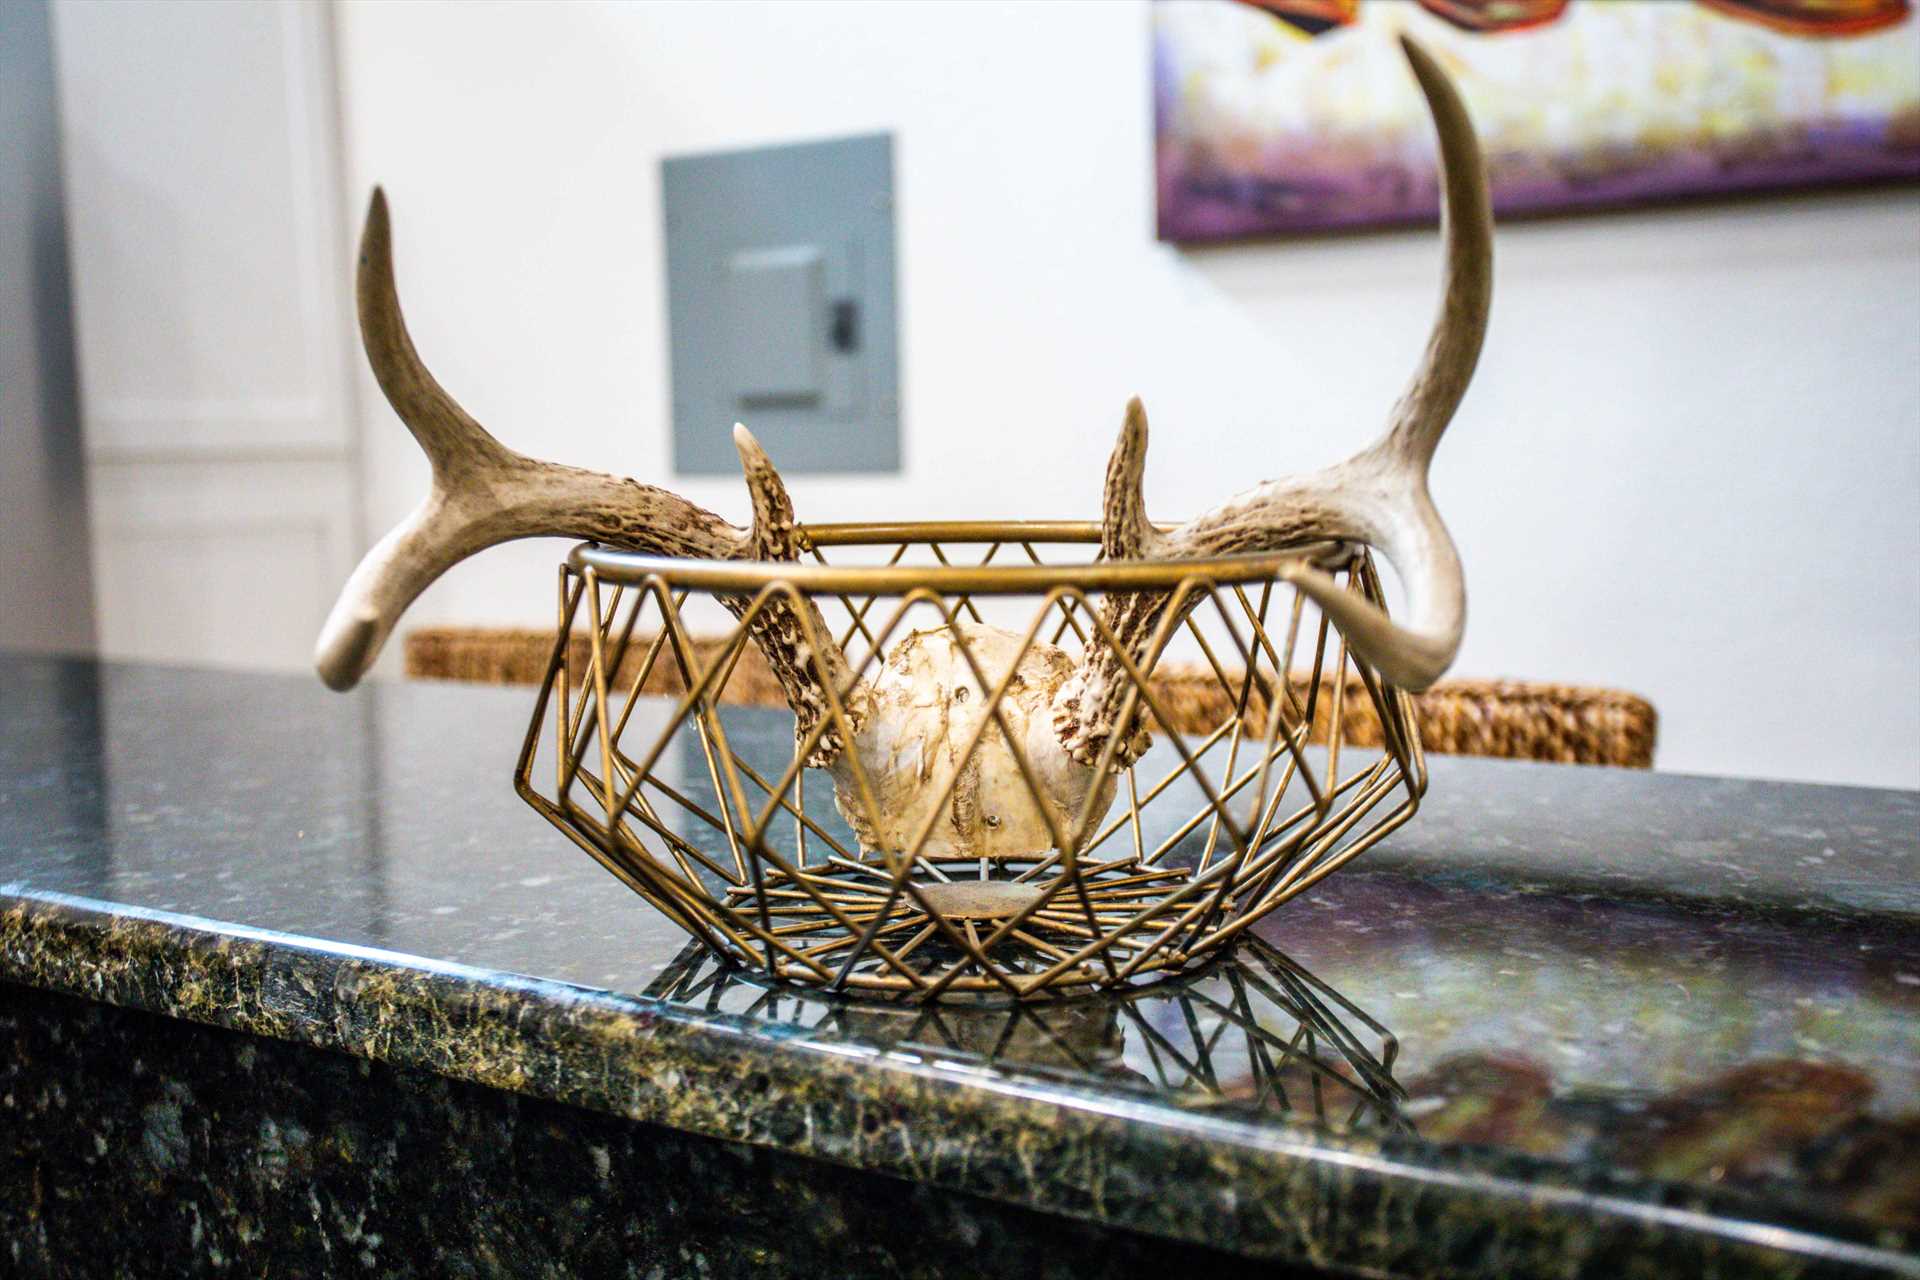                                                 Take a closer look! There's Western decor throughout the guest home, and even the counter tops reflect sparks of color!